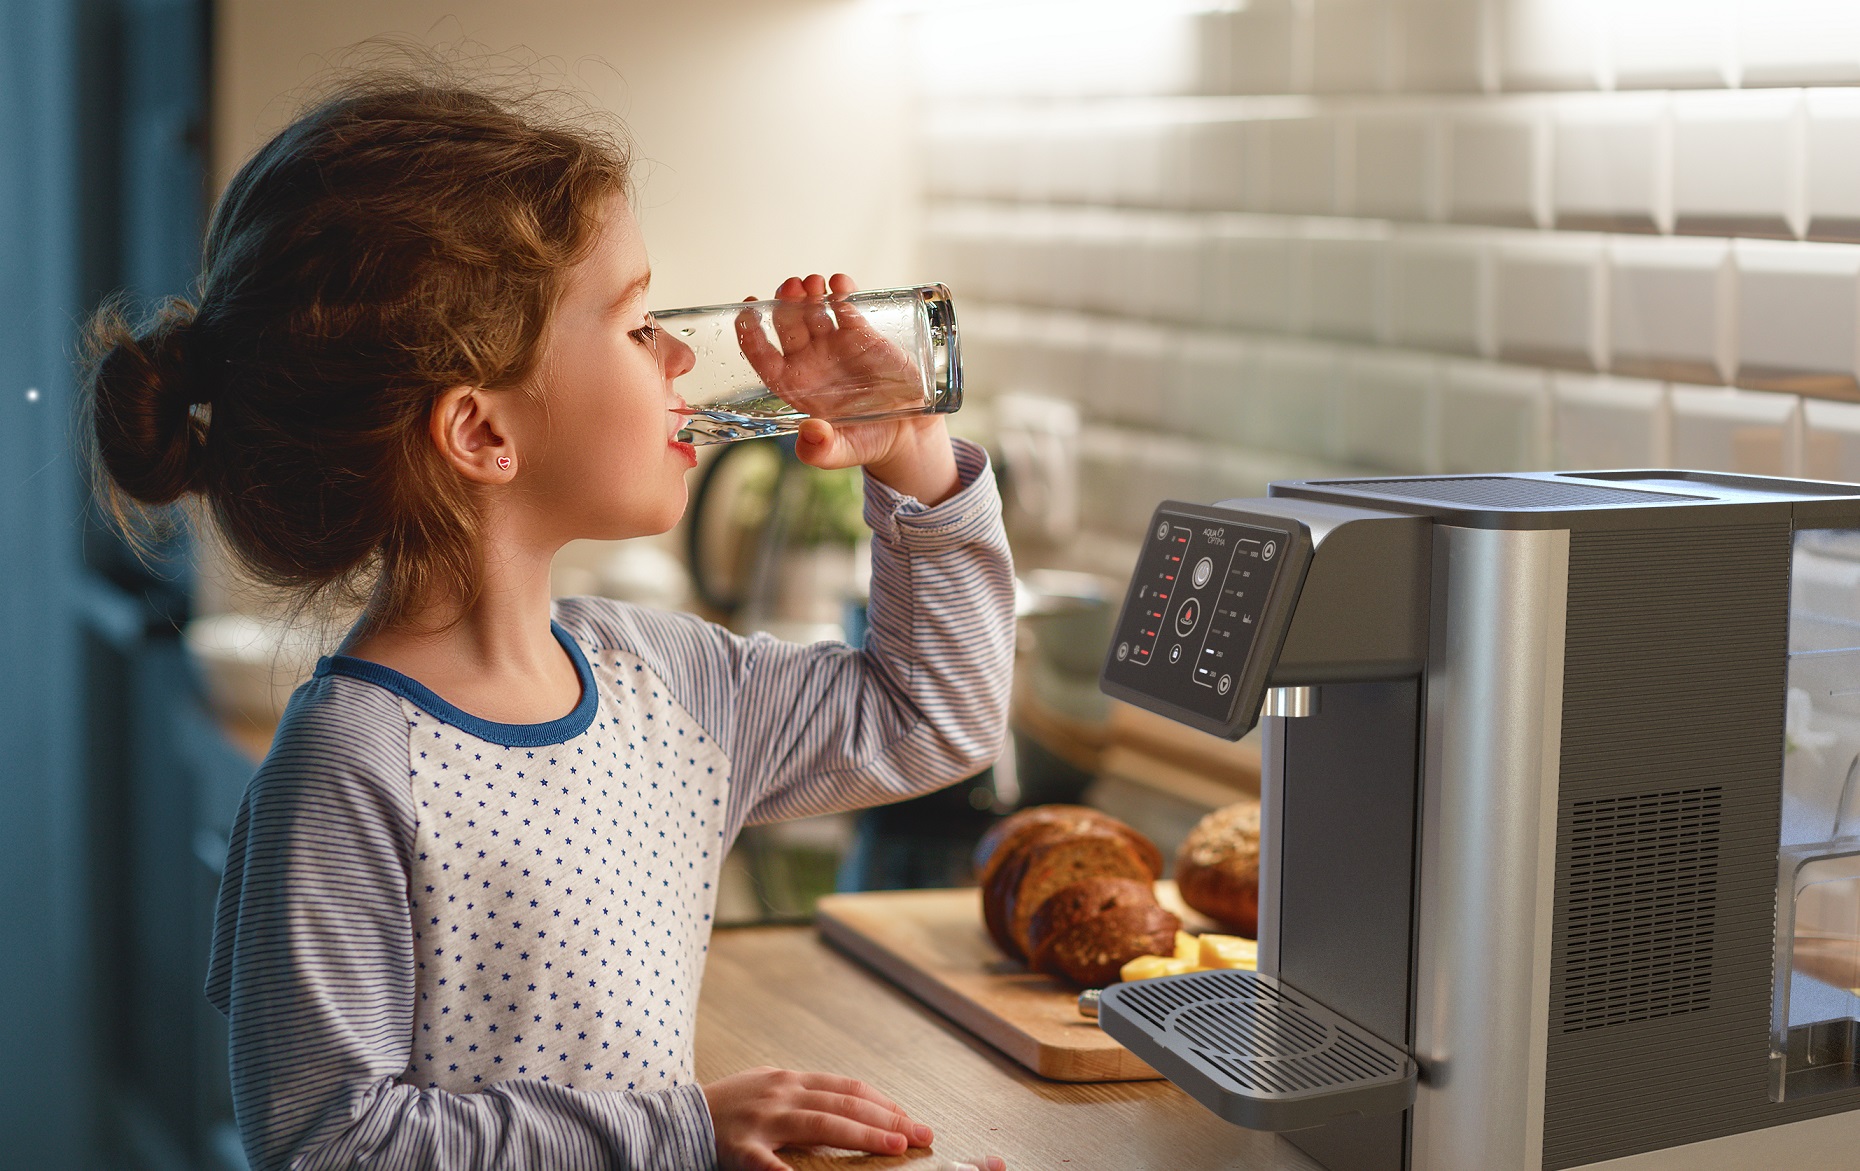 3in1 appliance from Aqua Optima offers filtered water ondemand